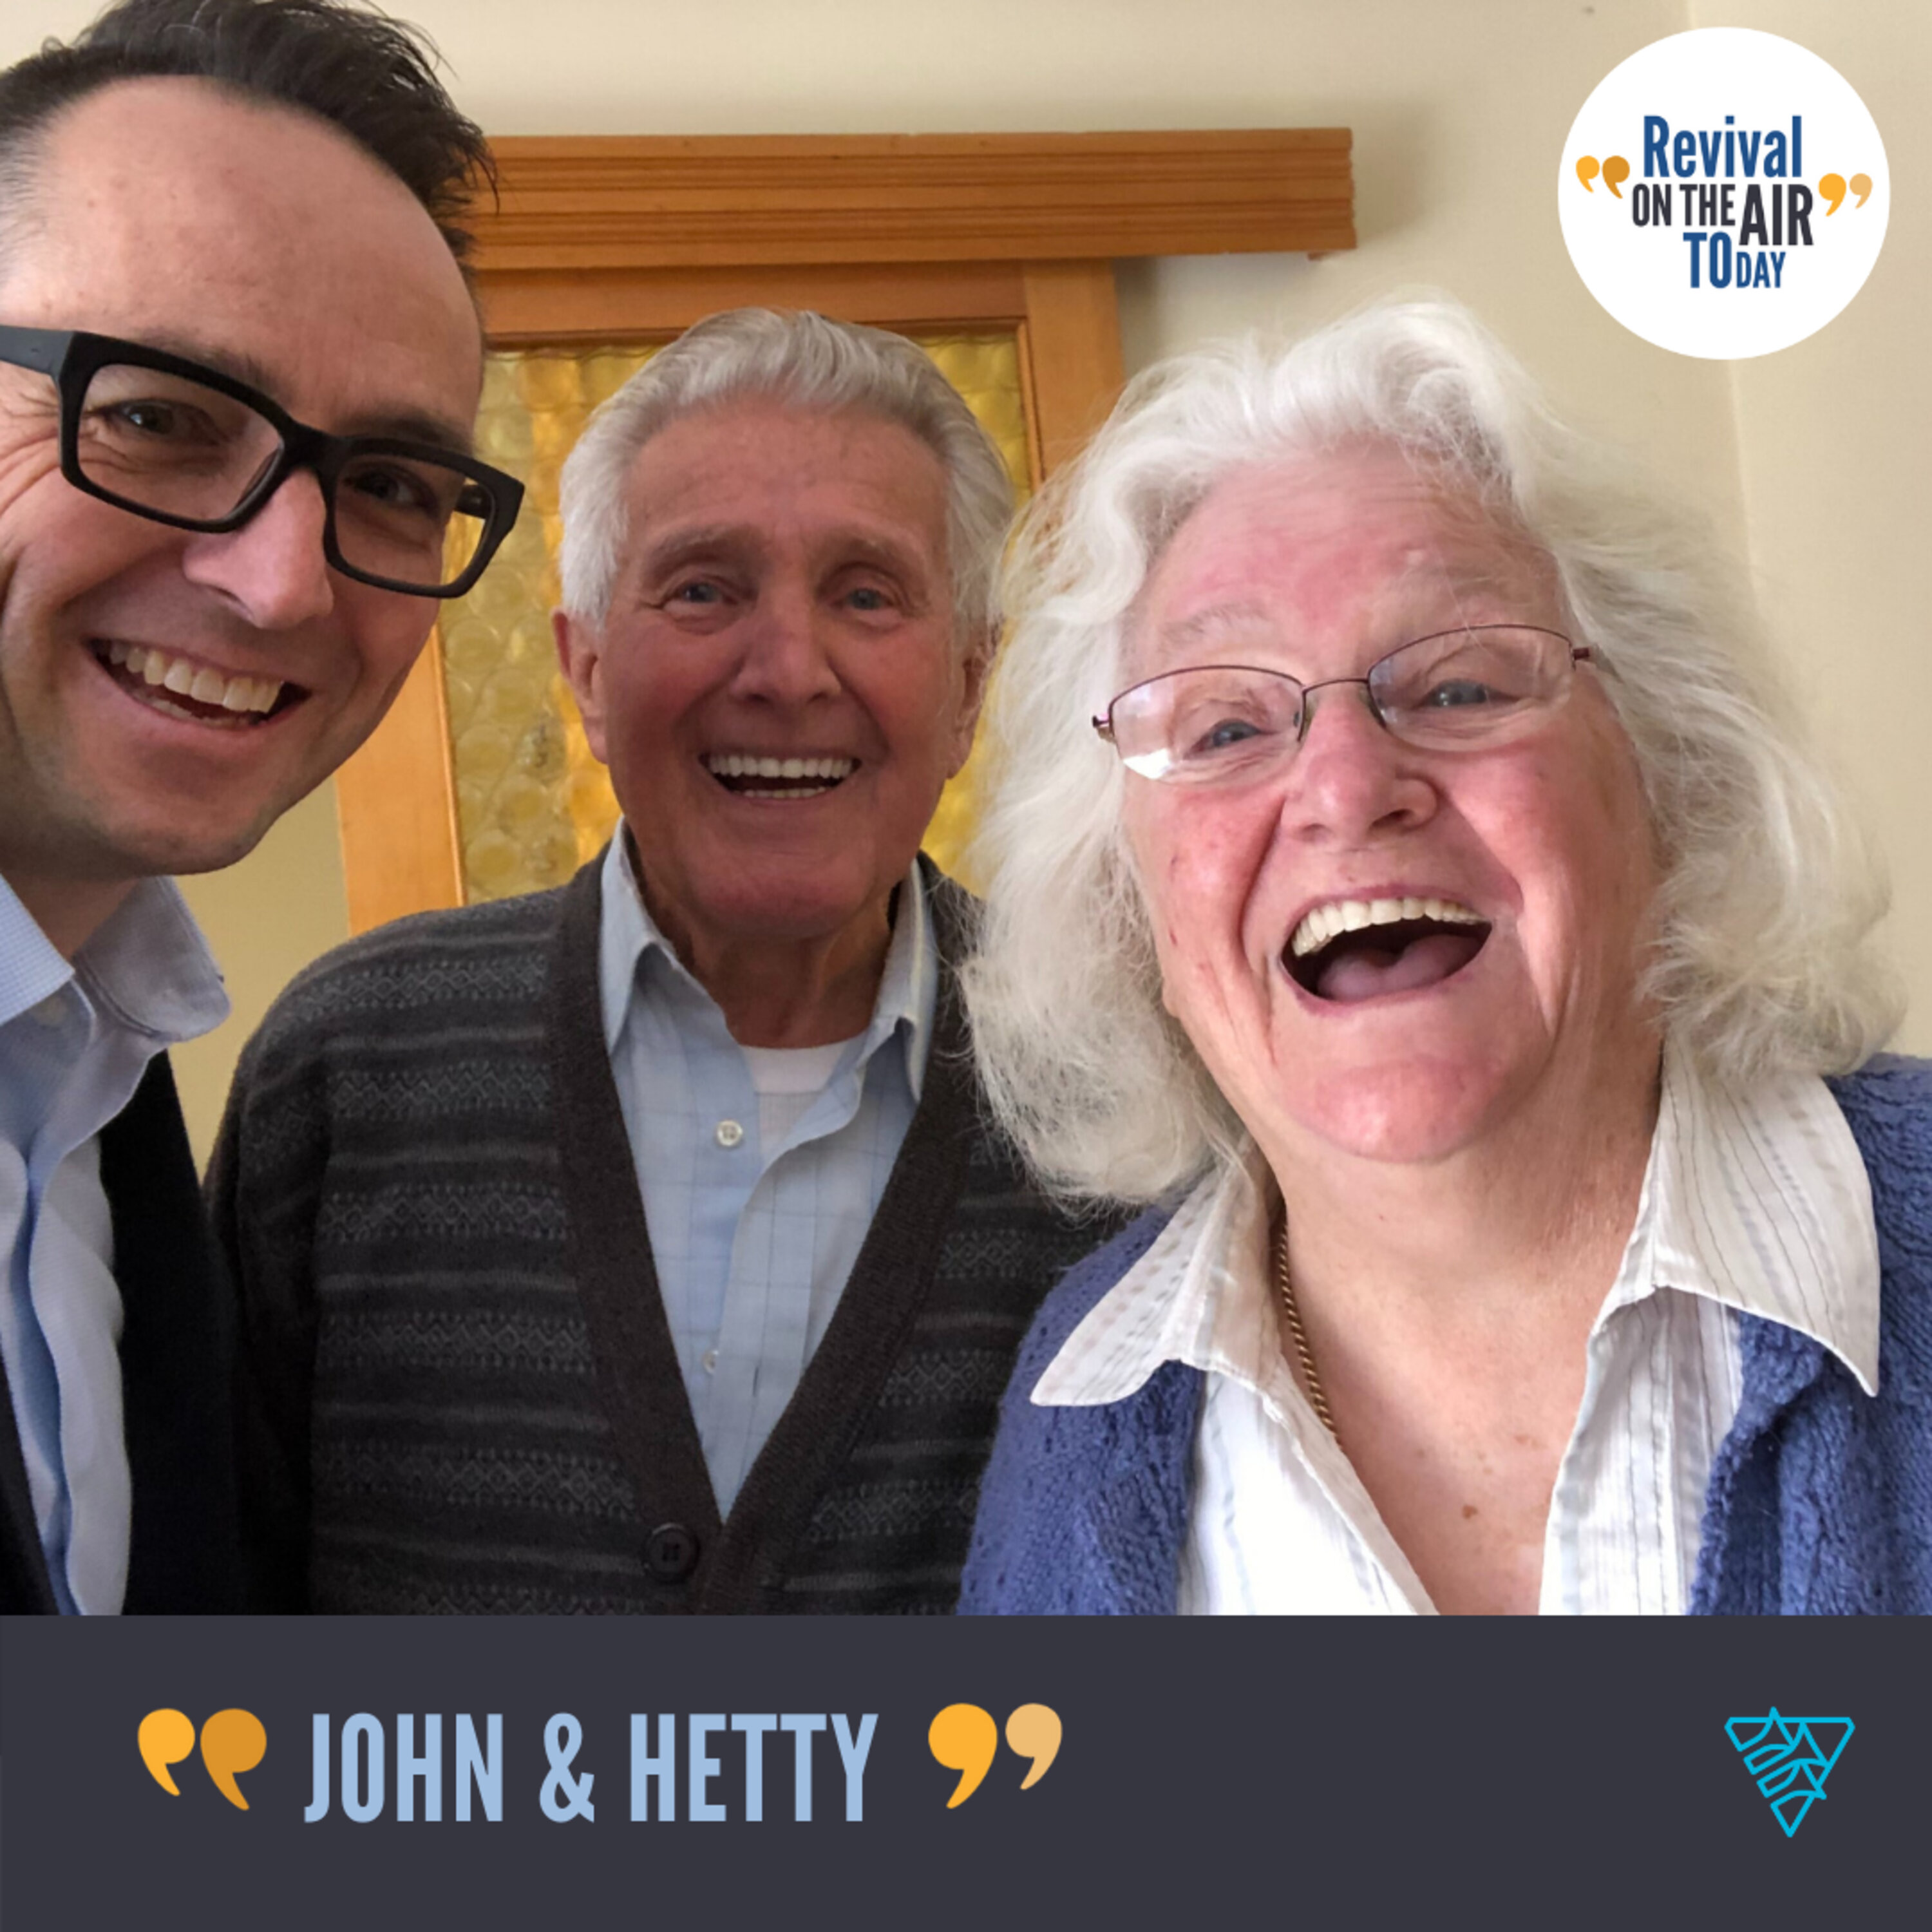 John & Hetty , miraculous healing from gout and other illnesses